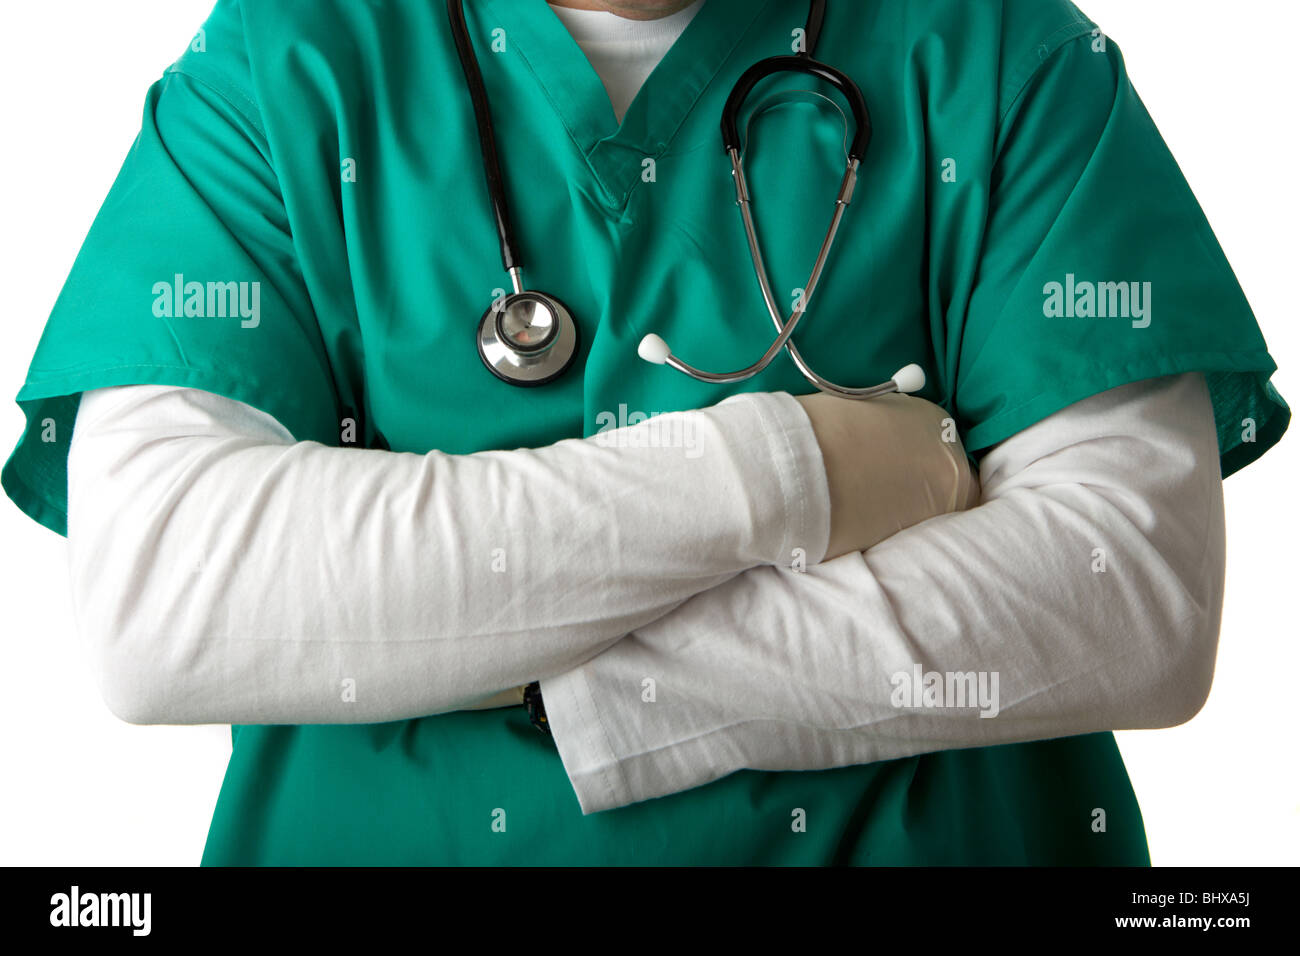 man wearing medical scrubs and stethoscope with arms folded Stock Photo